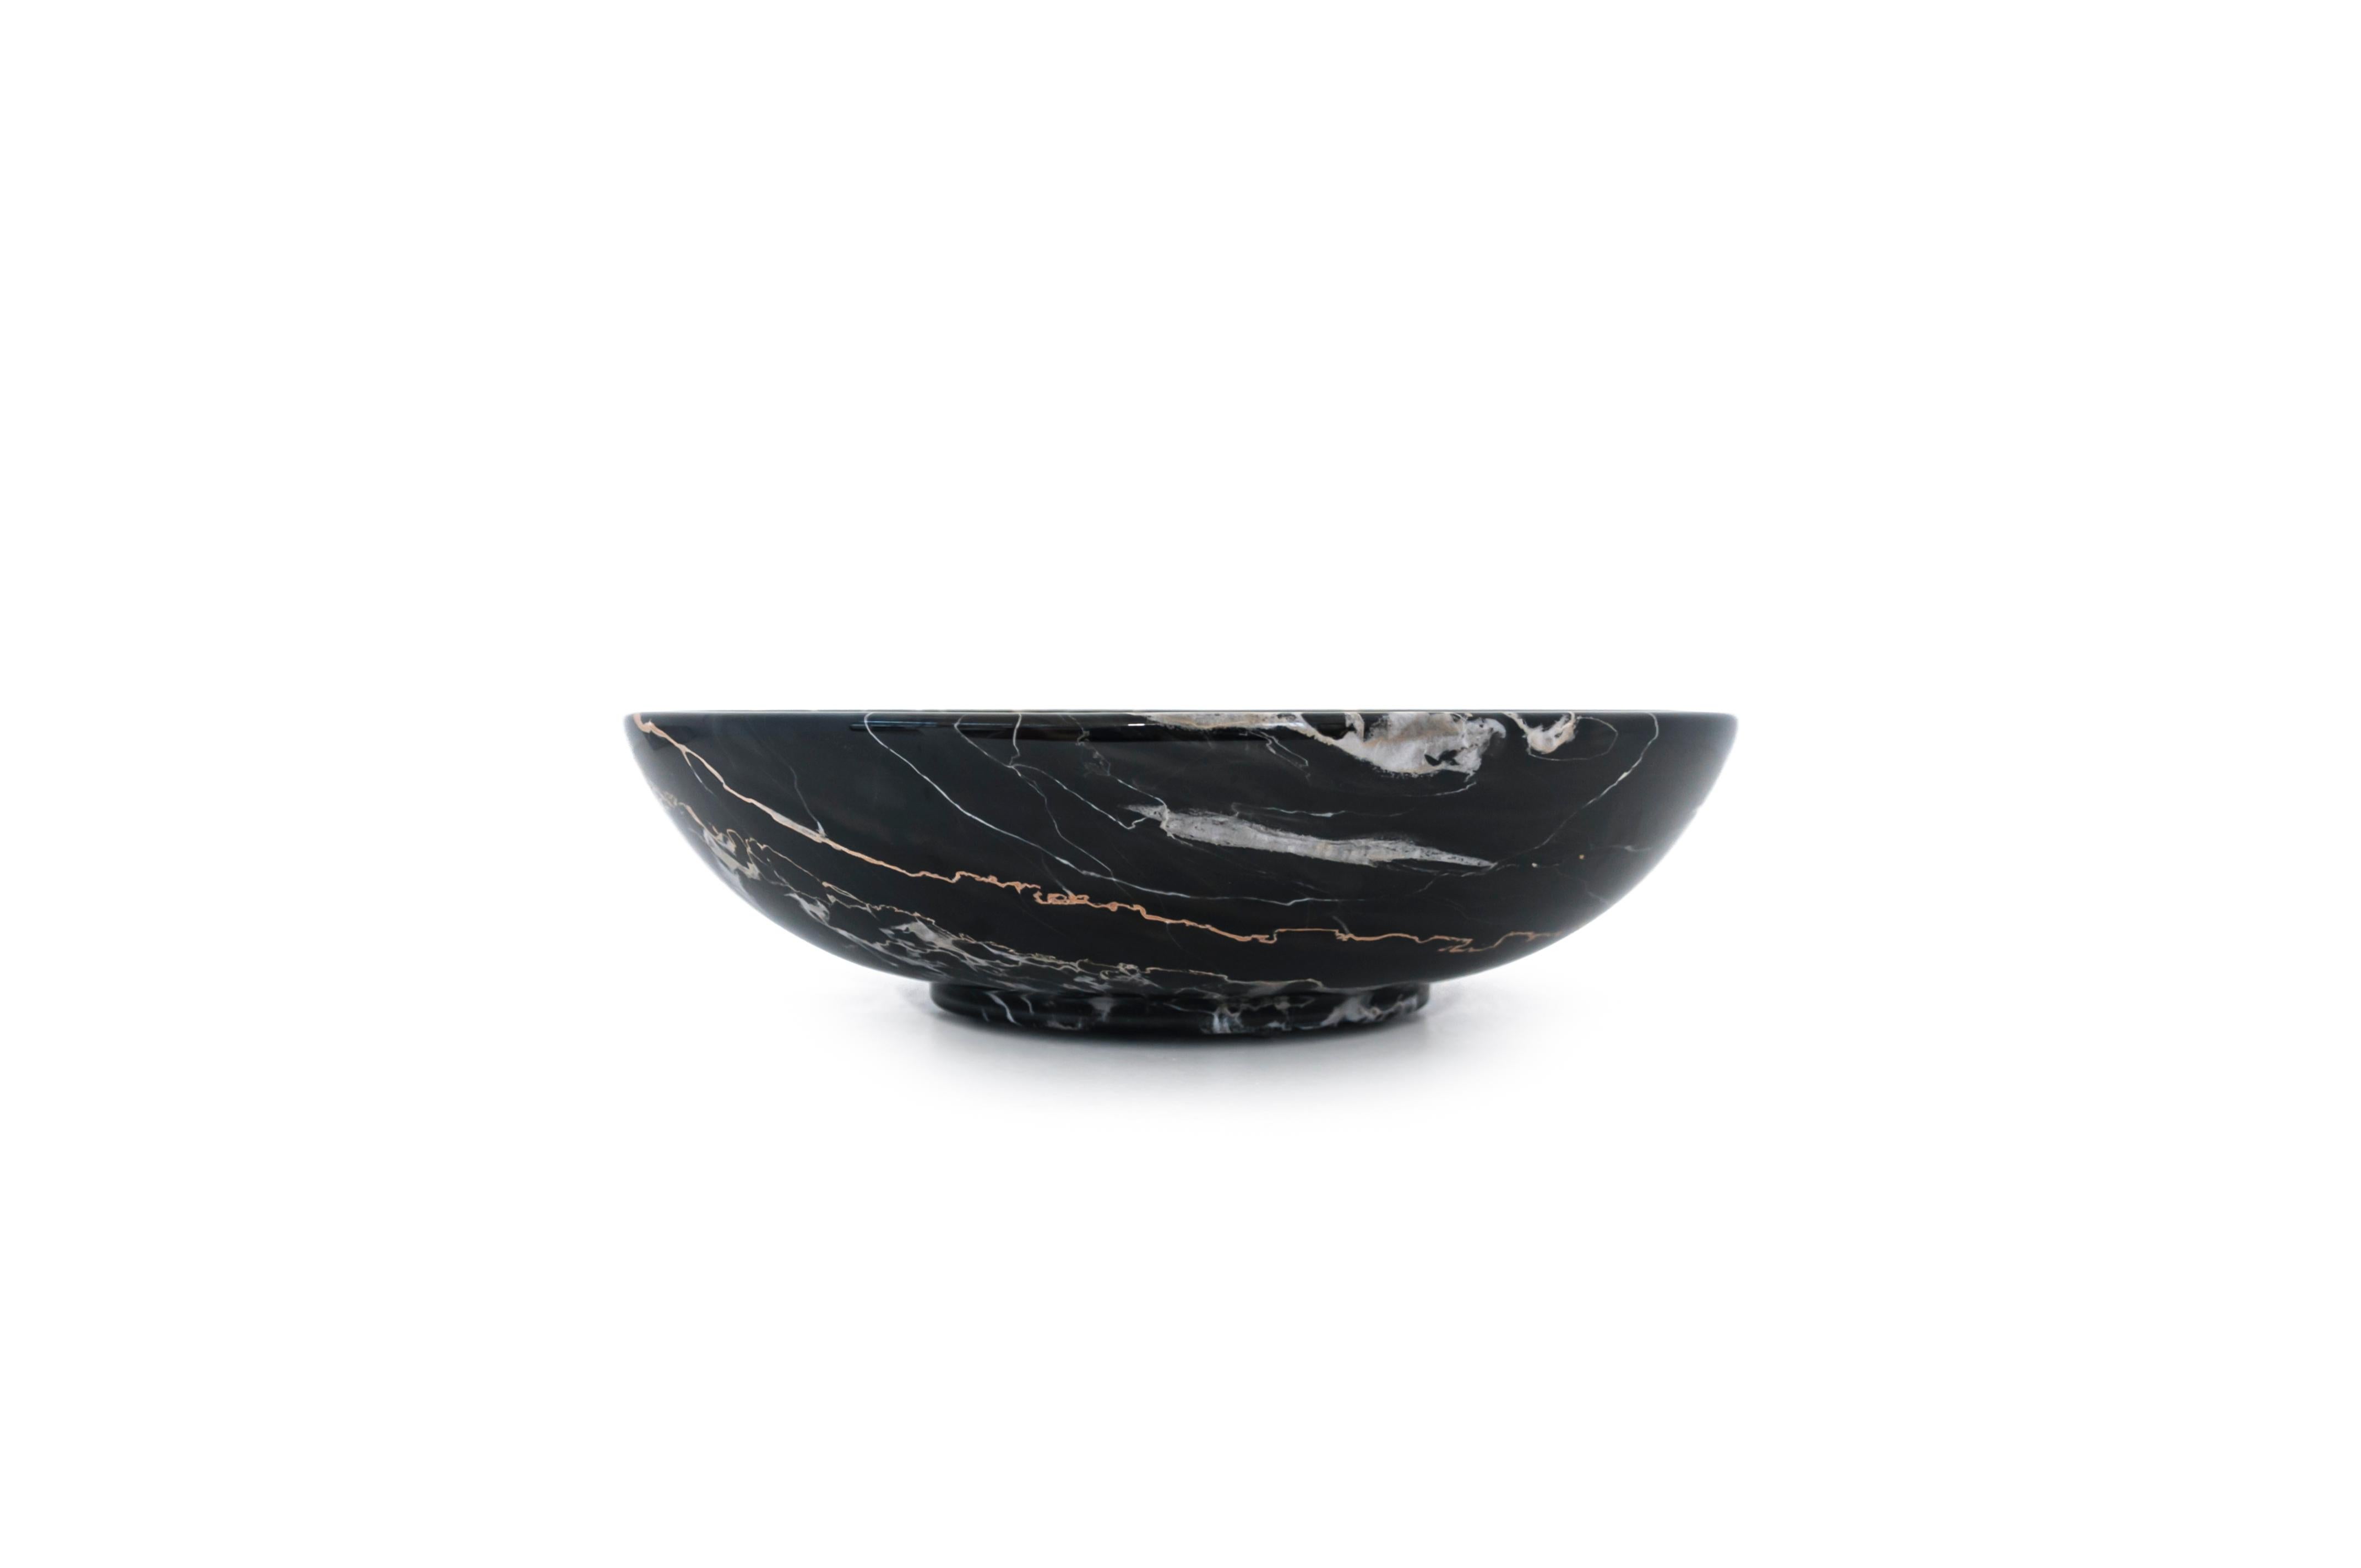 Big fruit bowl in Portoro marble, characterised by a dark black background with golden veins. Processed in Carrara, Italy. You have a 100% made in Italy product.
It is ideal to present fruit or to be used as a centrepiece.
Each piece is in a way